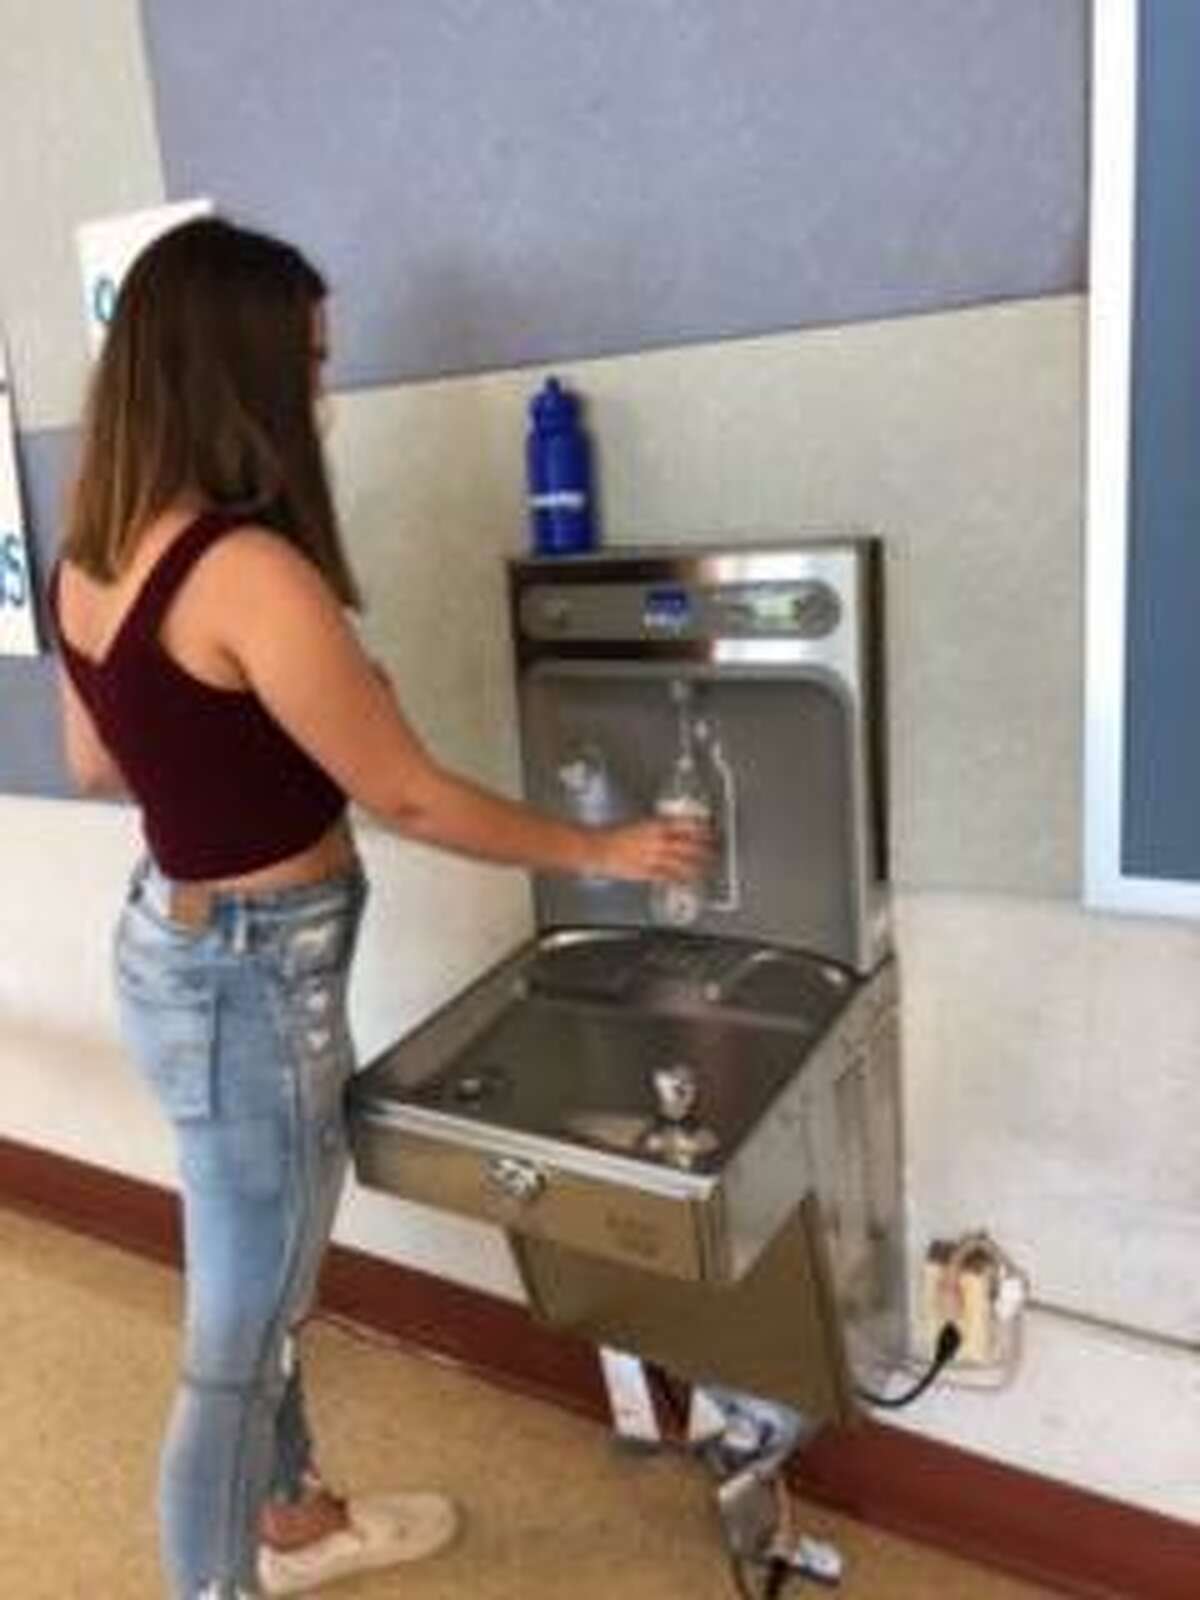 Connecticut Water has announced the recipients of its 2022 School Water Bottle Filling Station and Firefighter Support Grant programs.